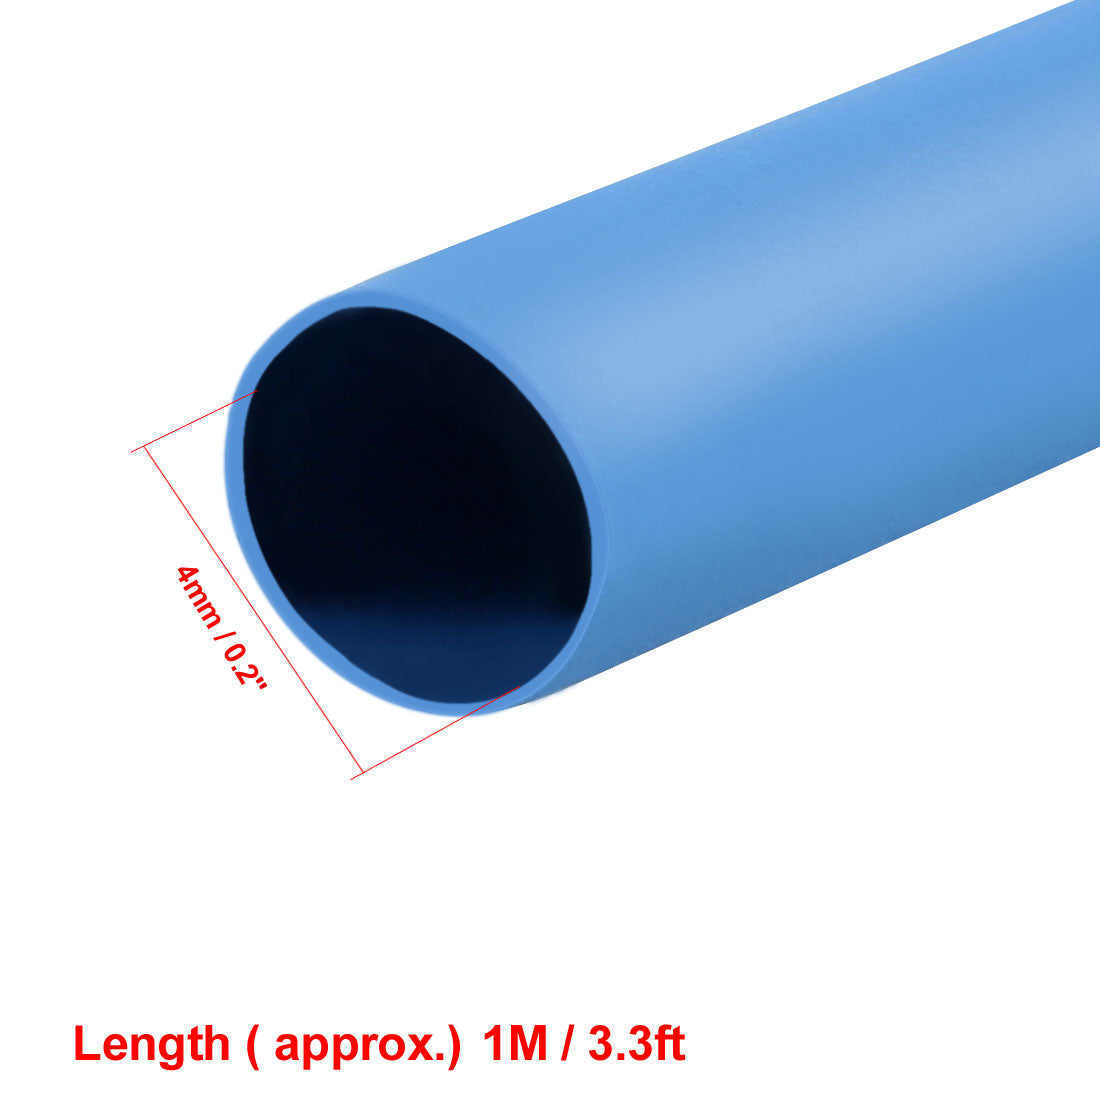 uxcell Uxcell Heat Shrink Tube 2:1 Electrical Insulation Tube Wire Cable Tubing Sleeving Wrap Blue 4mm Diameter 1m Long